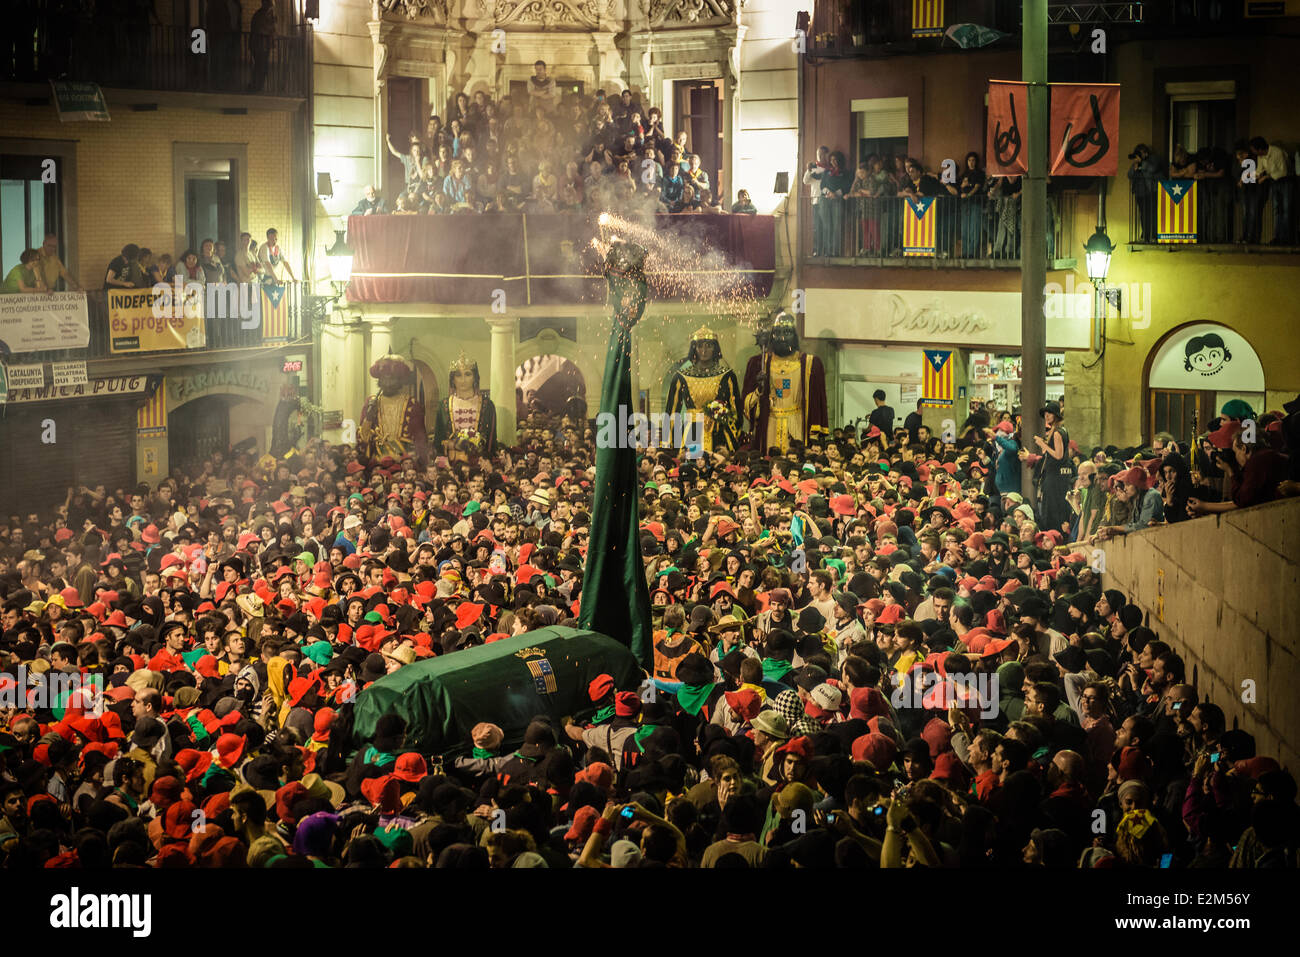 Berga, Spain. June 19th, 2014: The 'dragons', one of the oldest and most distinctive parts of the celebration, perform during the first complete Patum 2014 in Berga Credit:  matthi/Alamy Live News Stock Photo